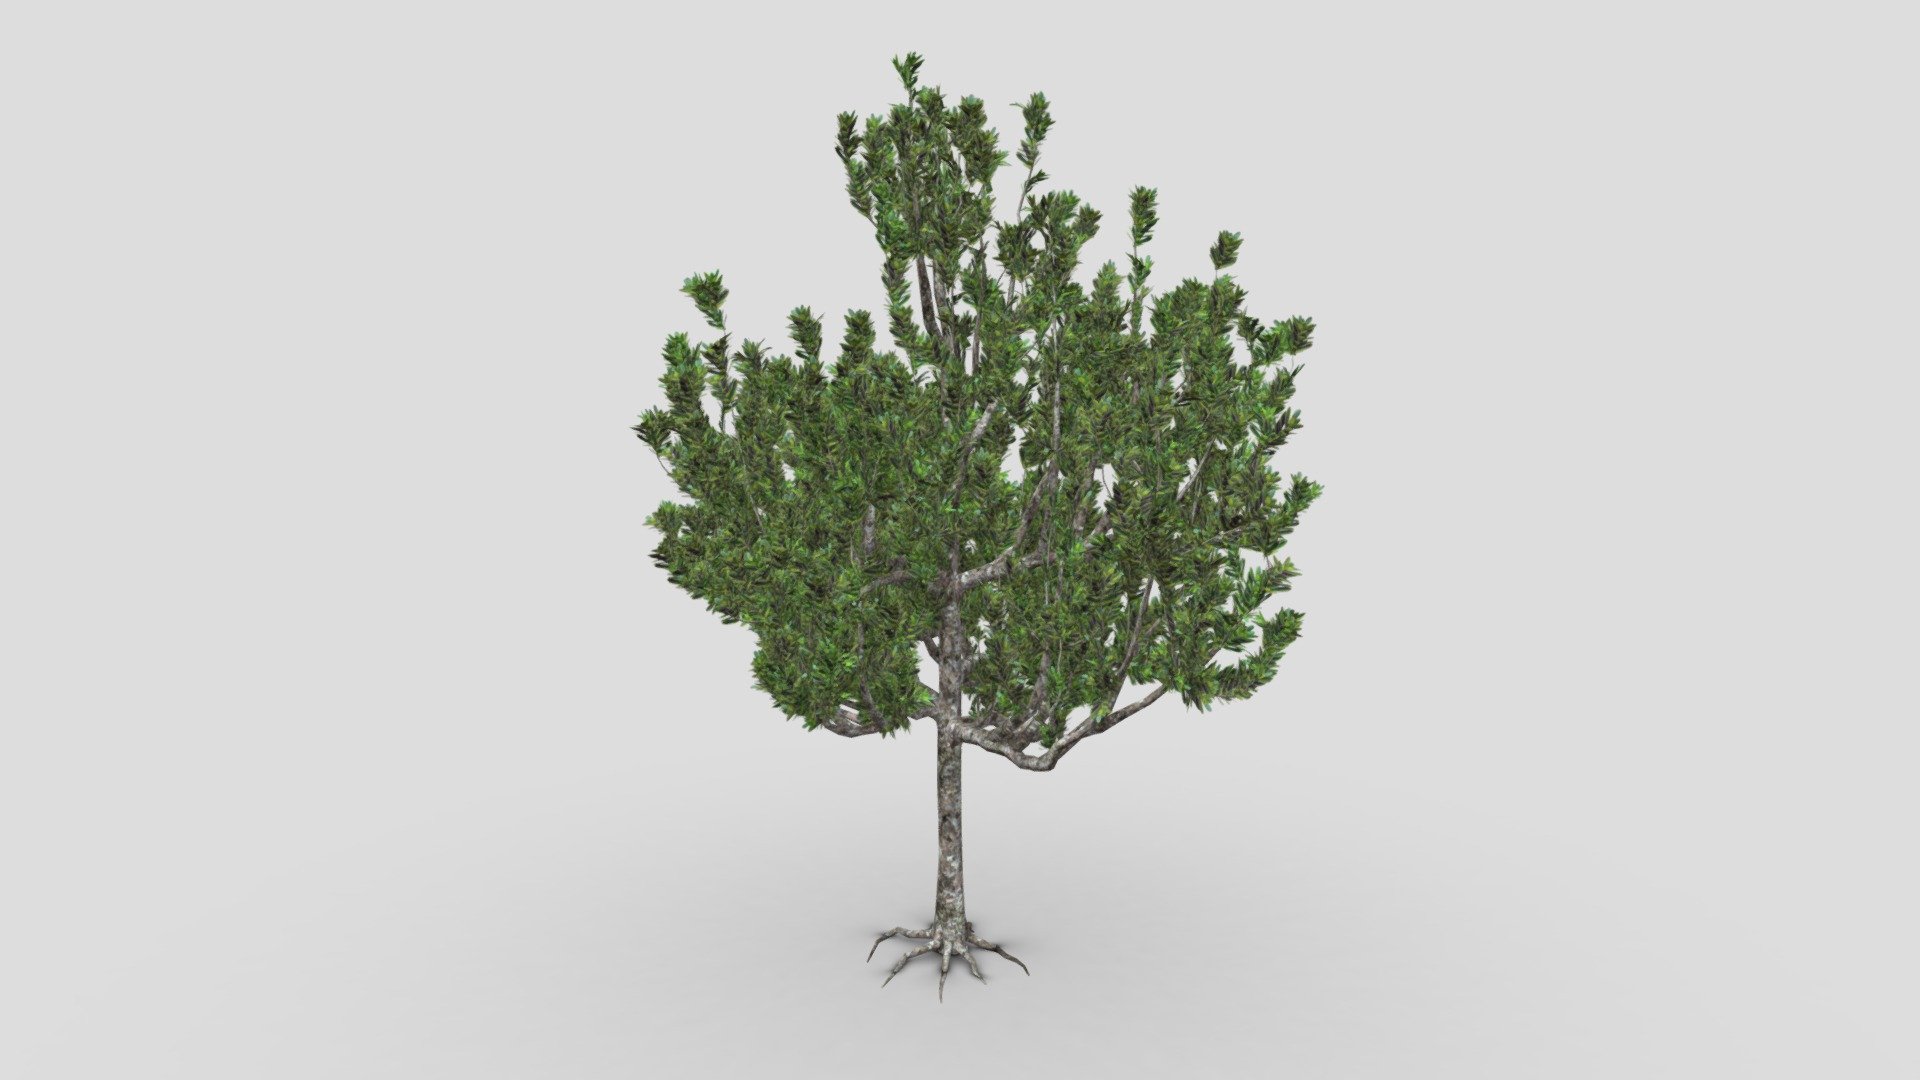 Agathis australis, commonly known by its Māori name kauri, is a coniferous tree of Araucariaceae in the genus Agathis, found north of 38°S in the northern regions of New Zealand’s North Island 3d model